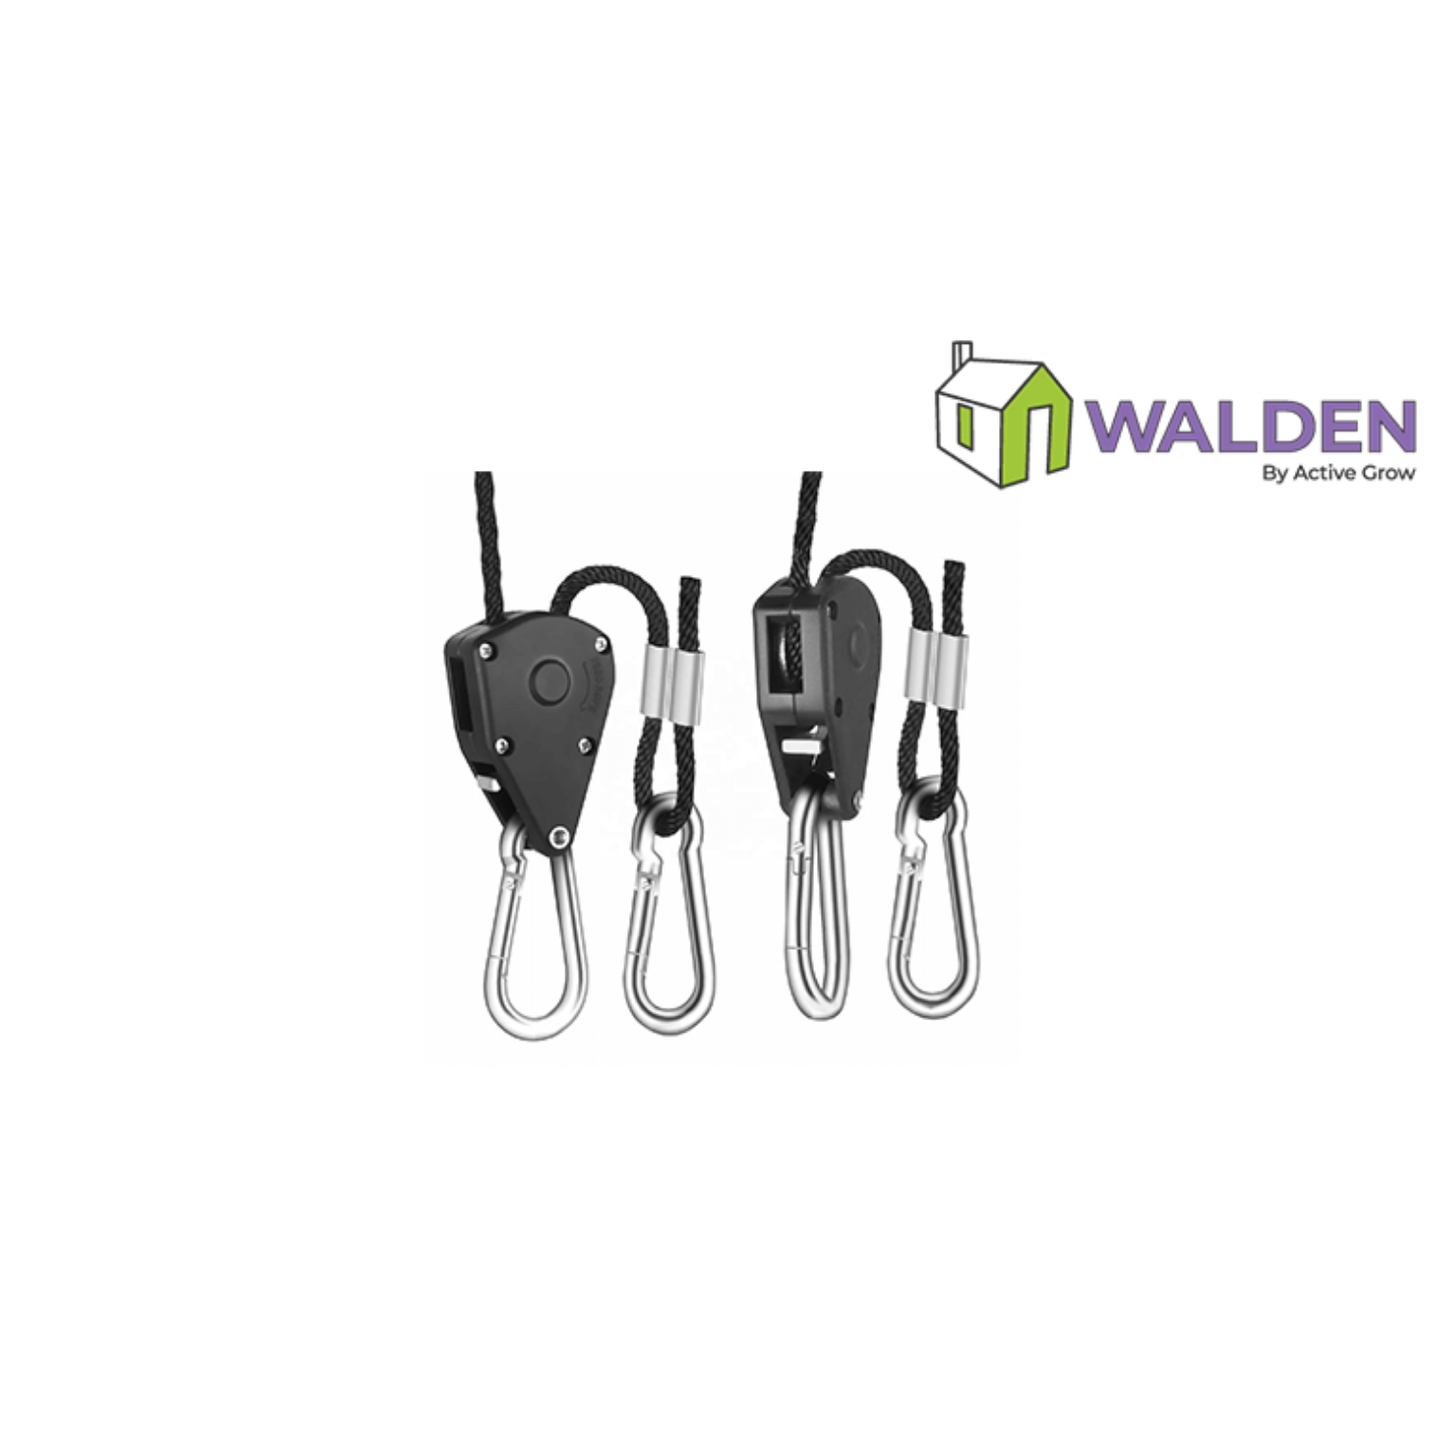 Active Grow Seed Starting 3-Tier LED Walden White Grow Tent Kit AG/24TENT/W/3S/SK Kits 769947348179